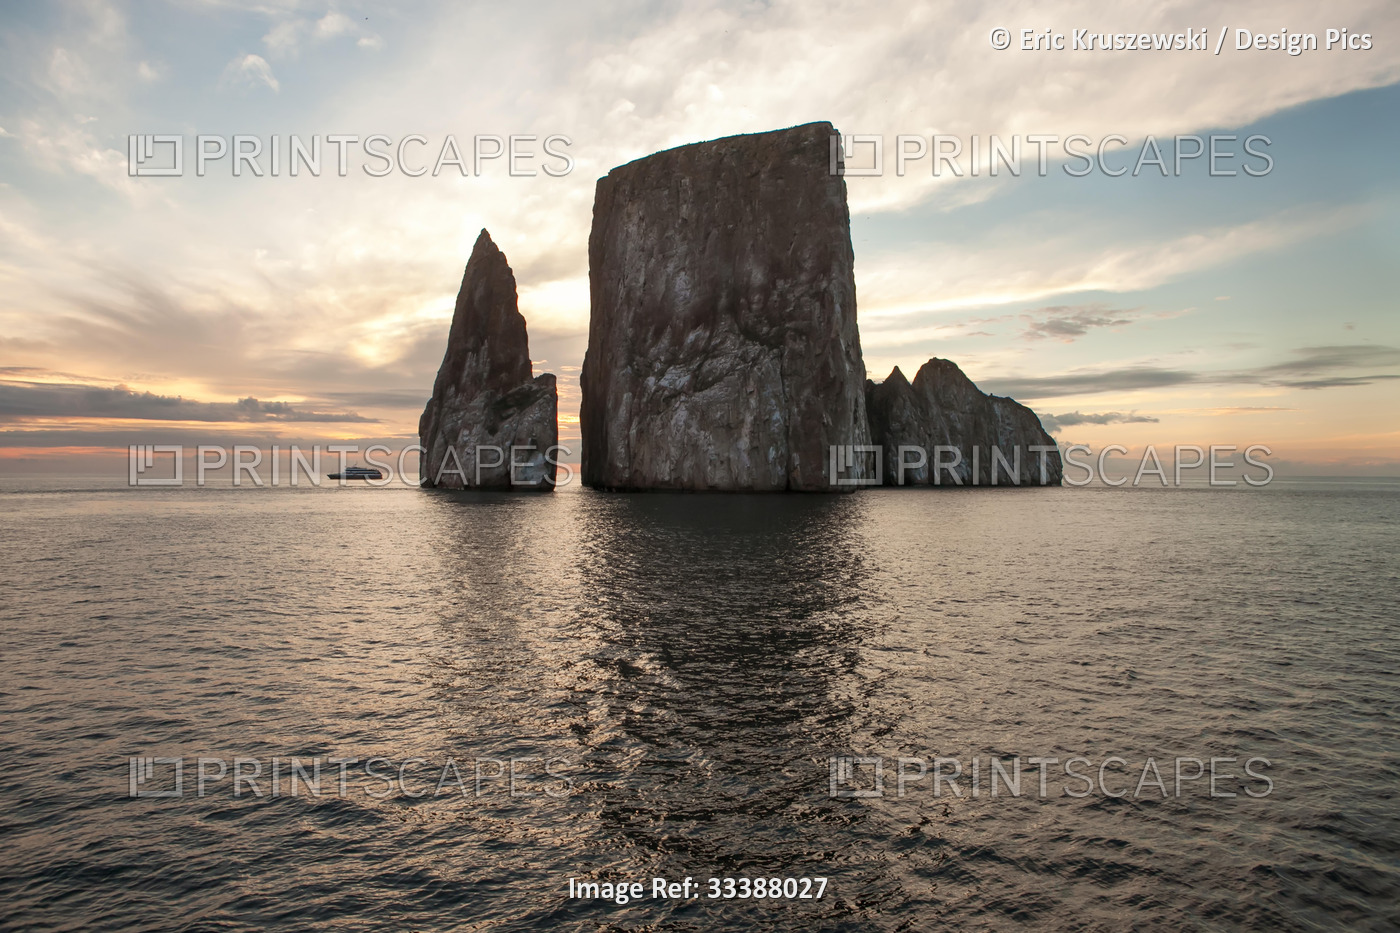 An expedition vessel passes near a large rock formation at sunset.; Pacific ...